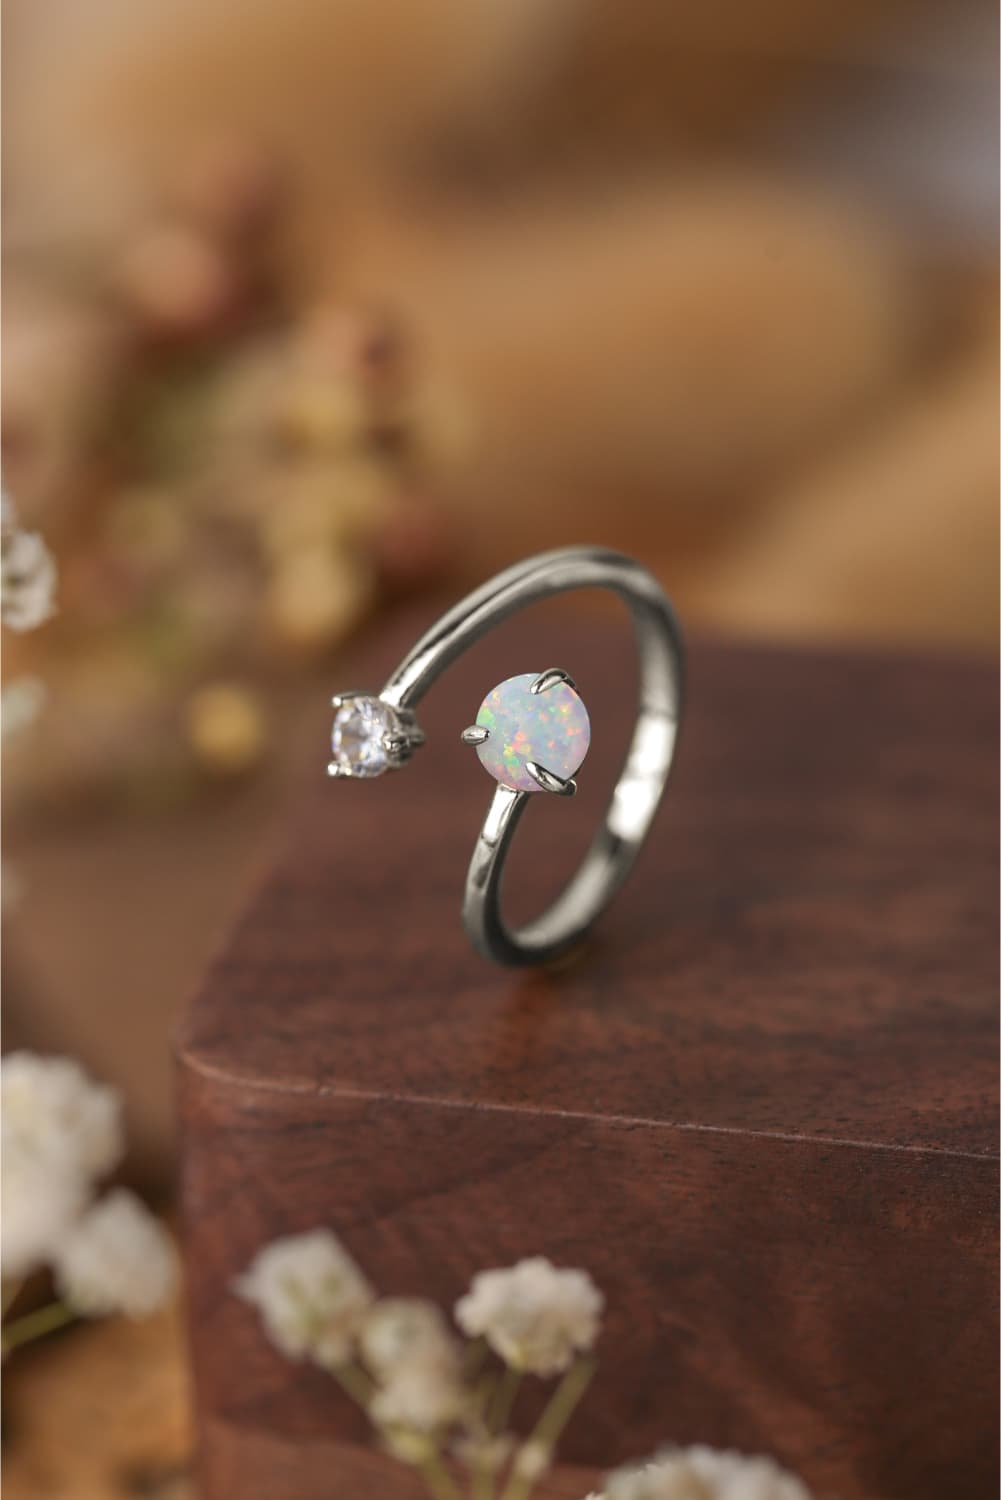 Opal 925 Sterling Silver Bypass Ring - Tophatter Shopping Deals - Electronics, Jewelry, Auction, App, Bidding, Gadgets, Fashion